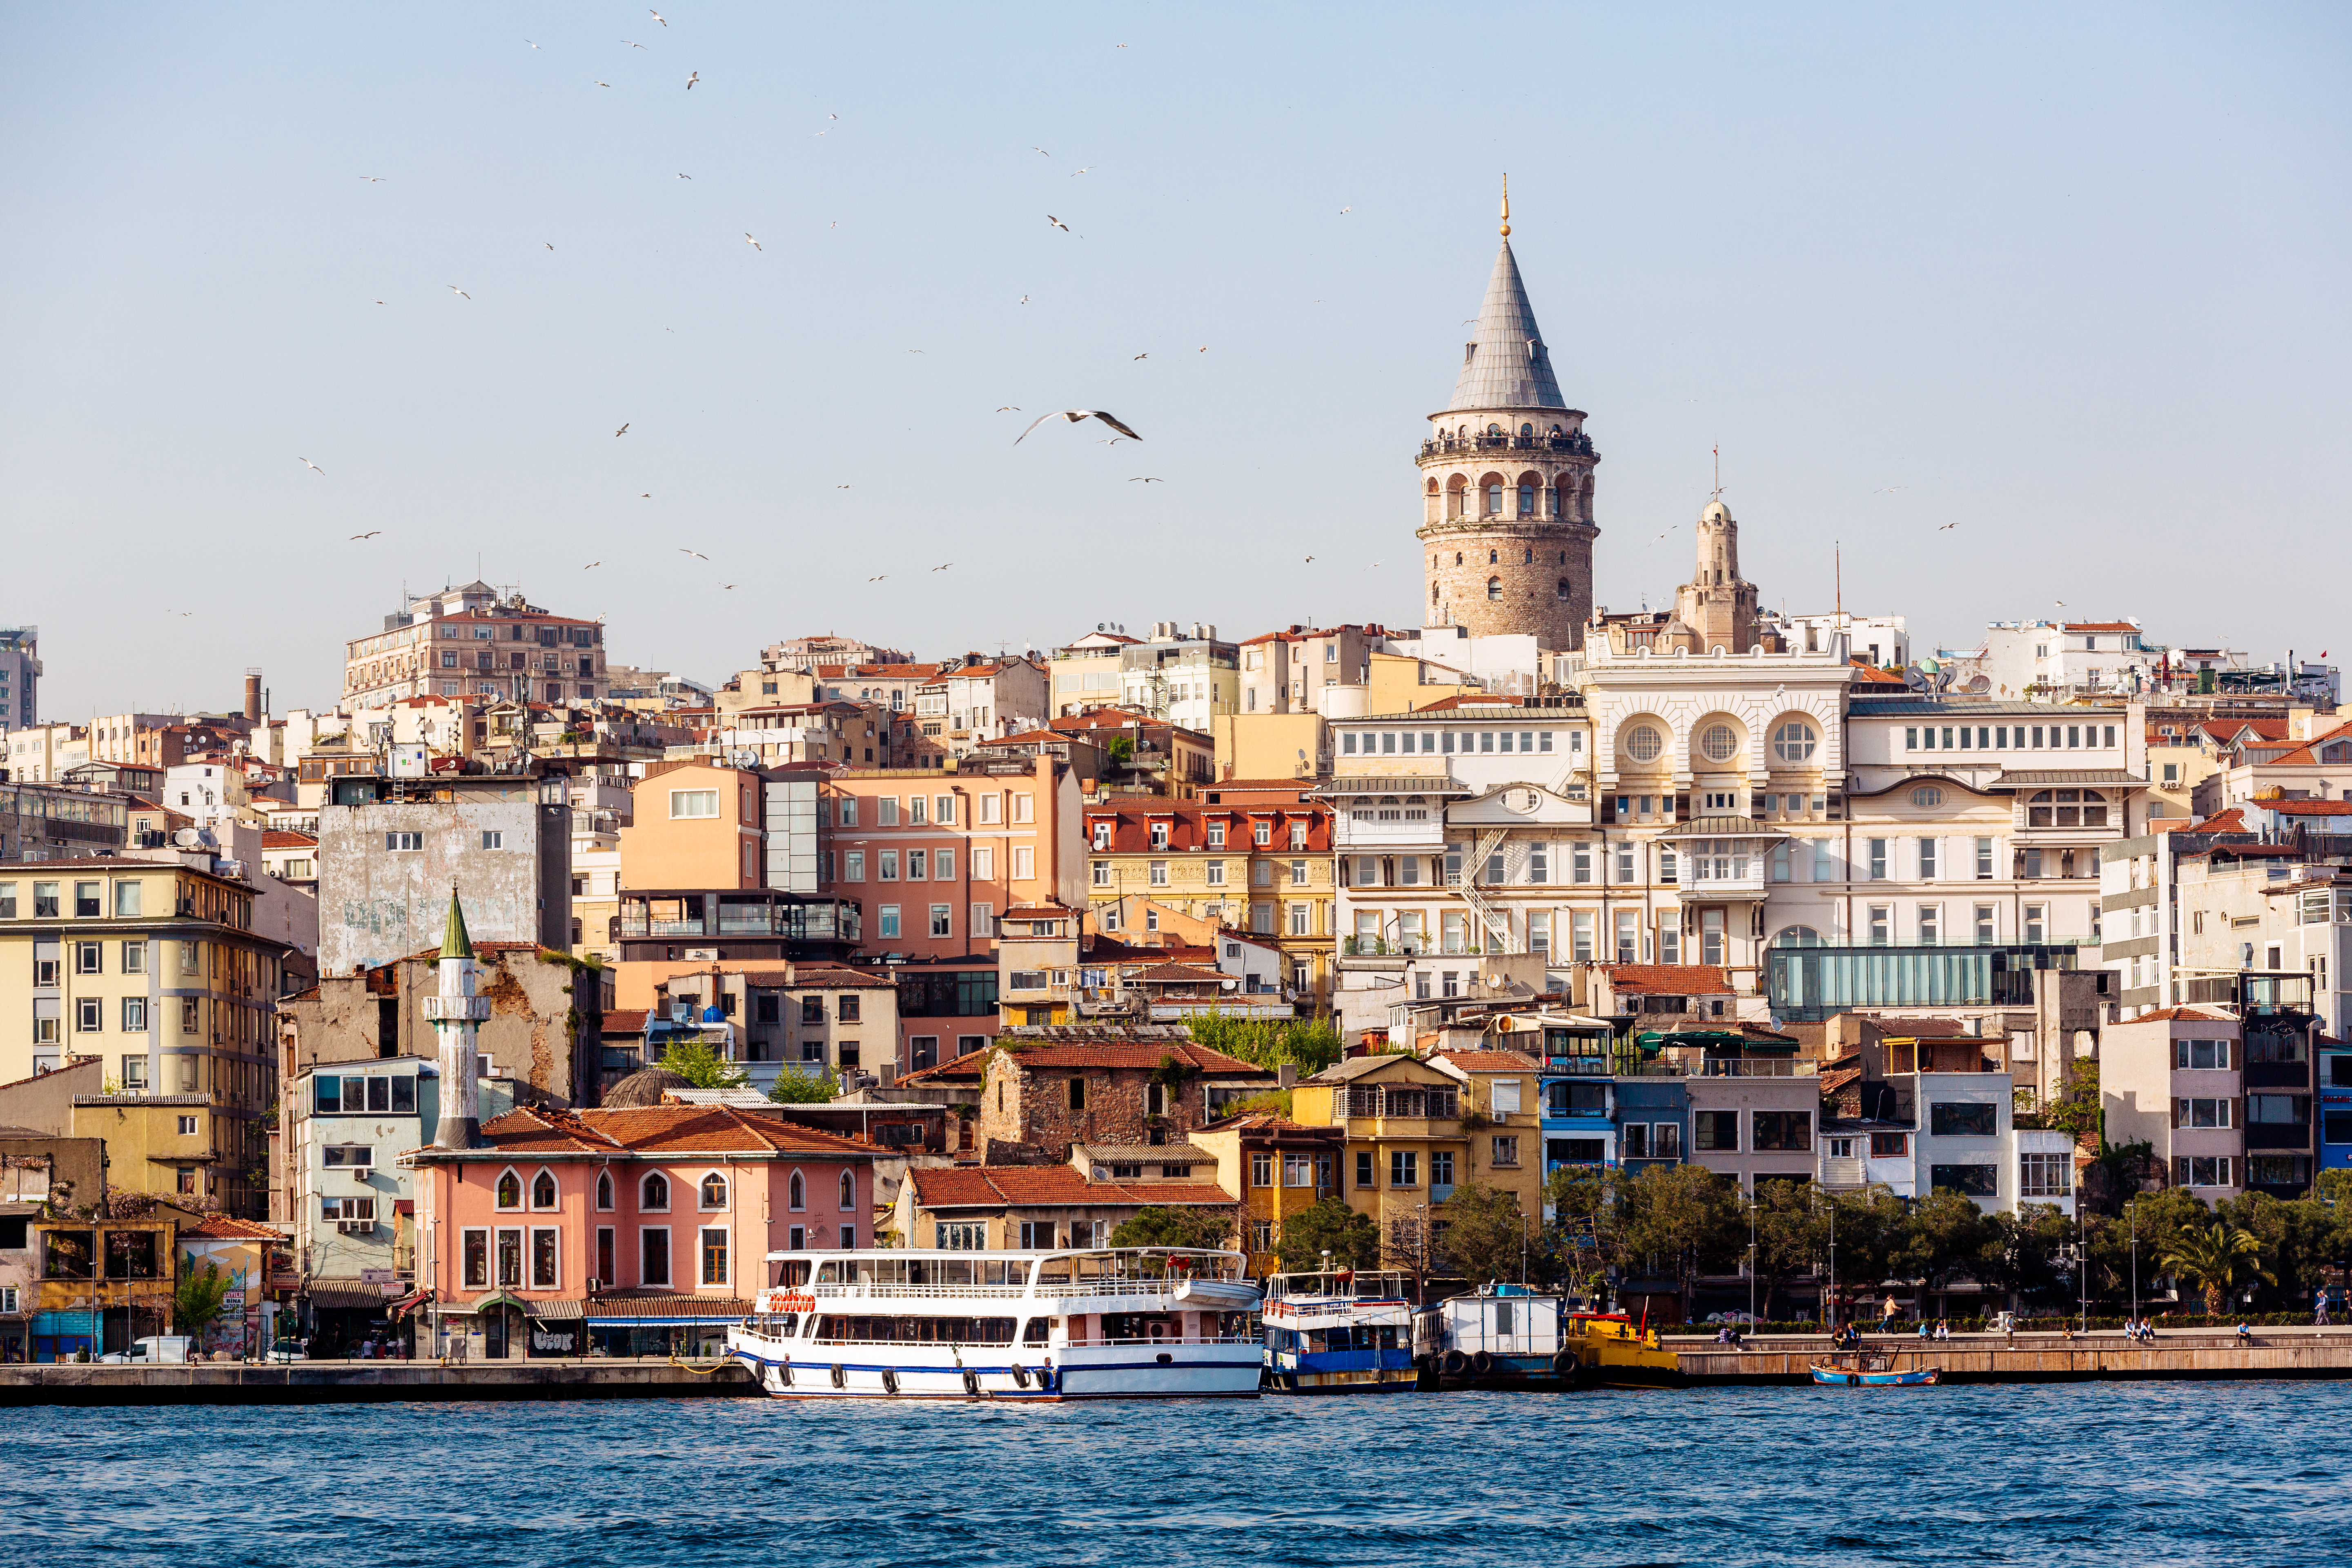 The airport wants to encourage more customers to visit Istanbul itself